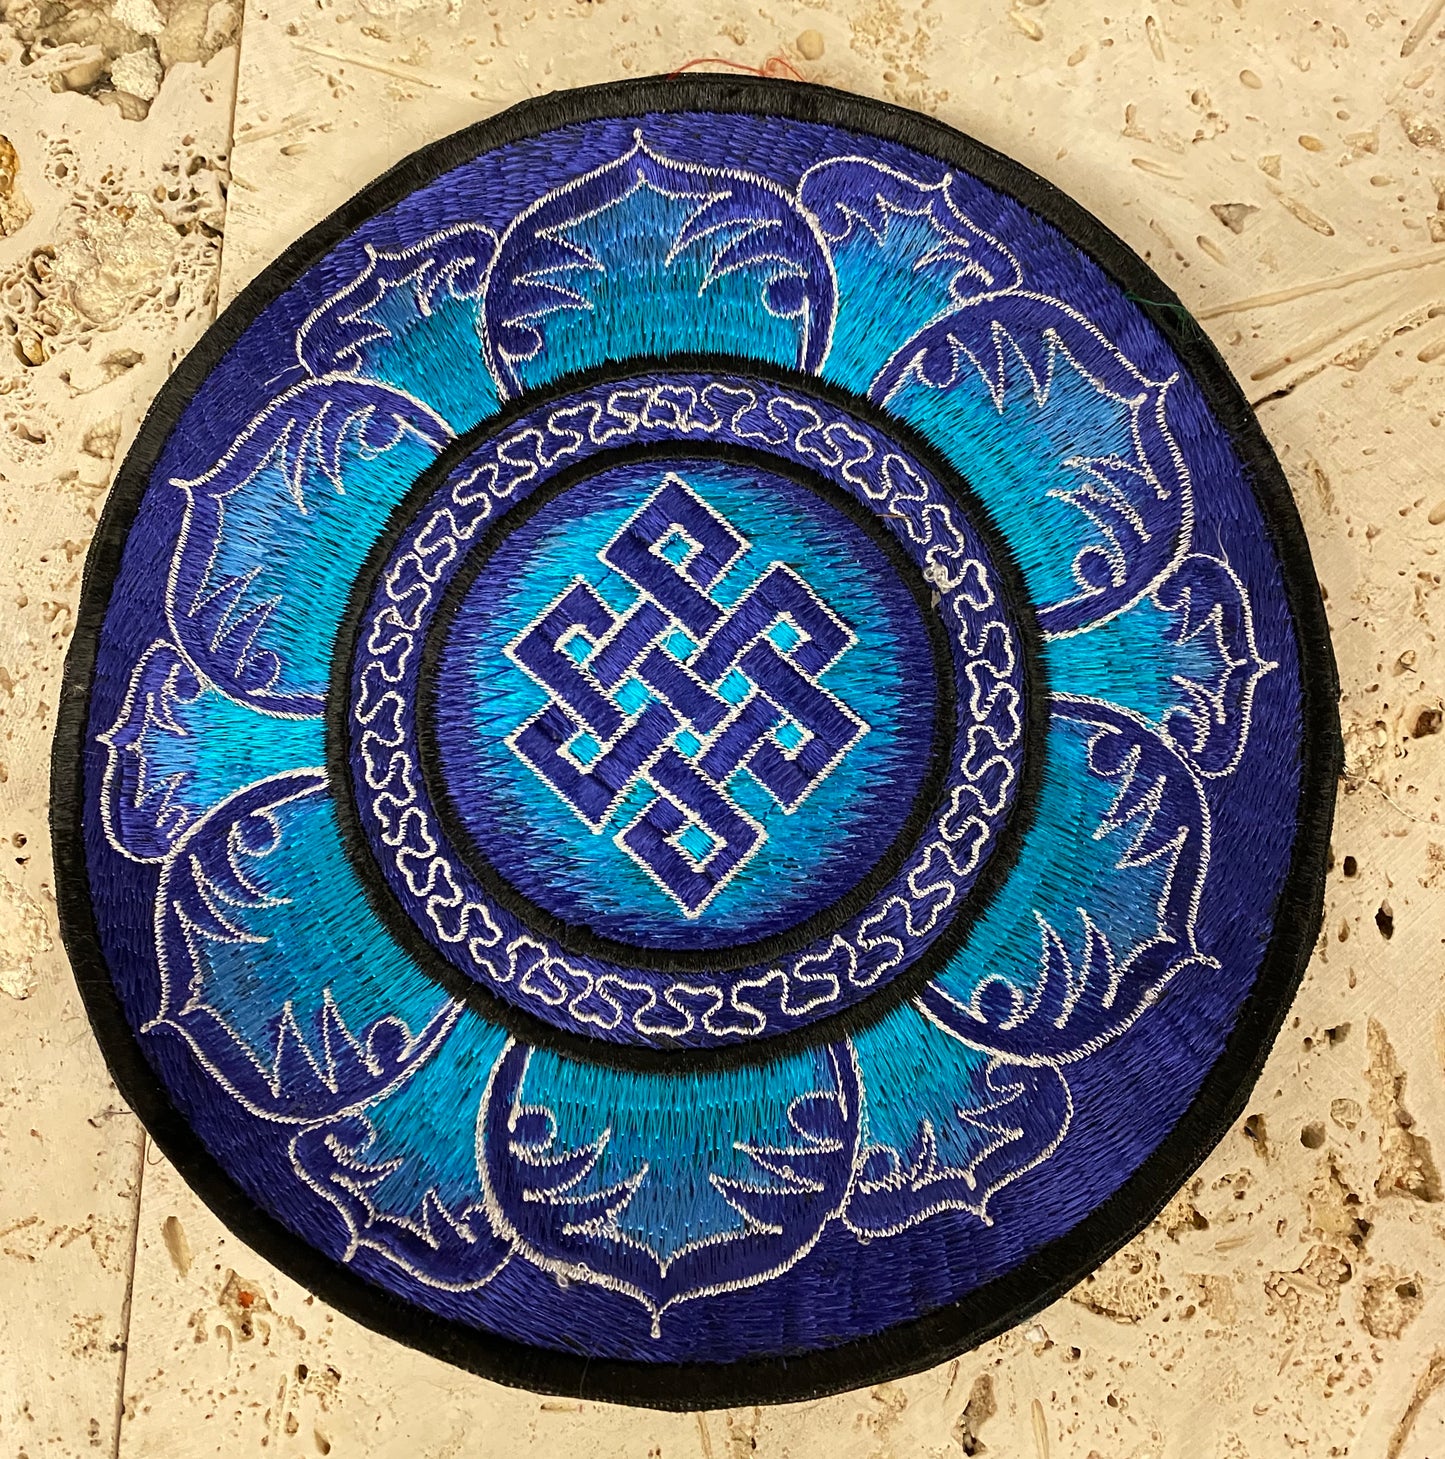 Handmade Embroidered Buddhist Endless Knot Rainbow Patches